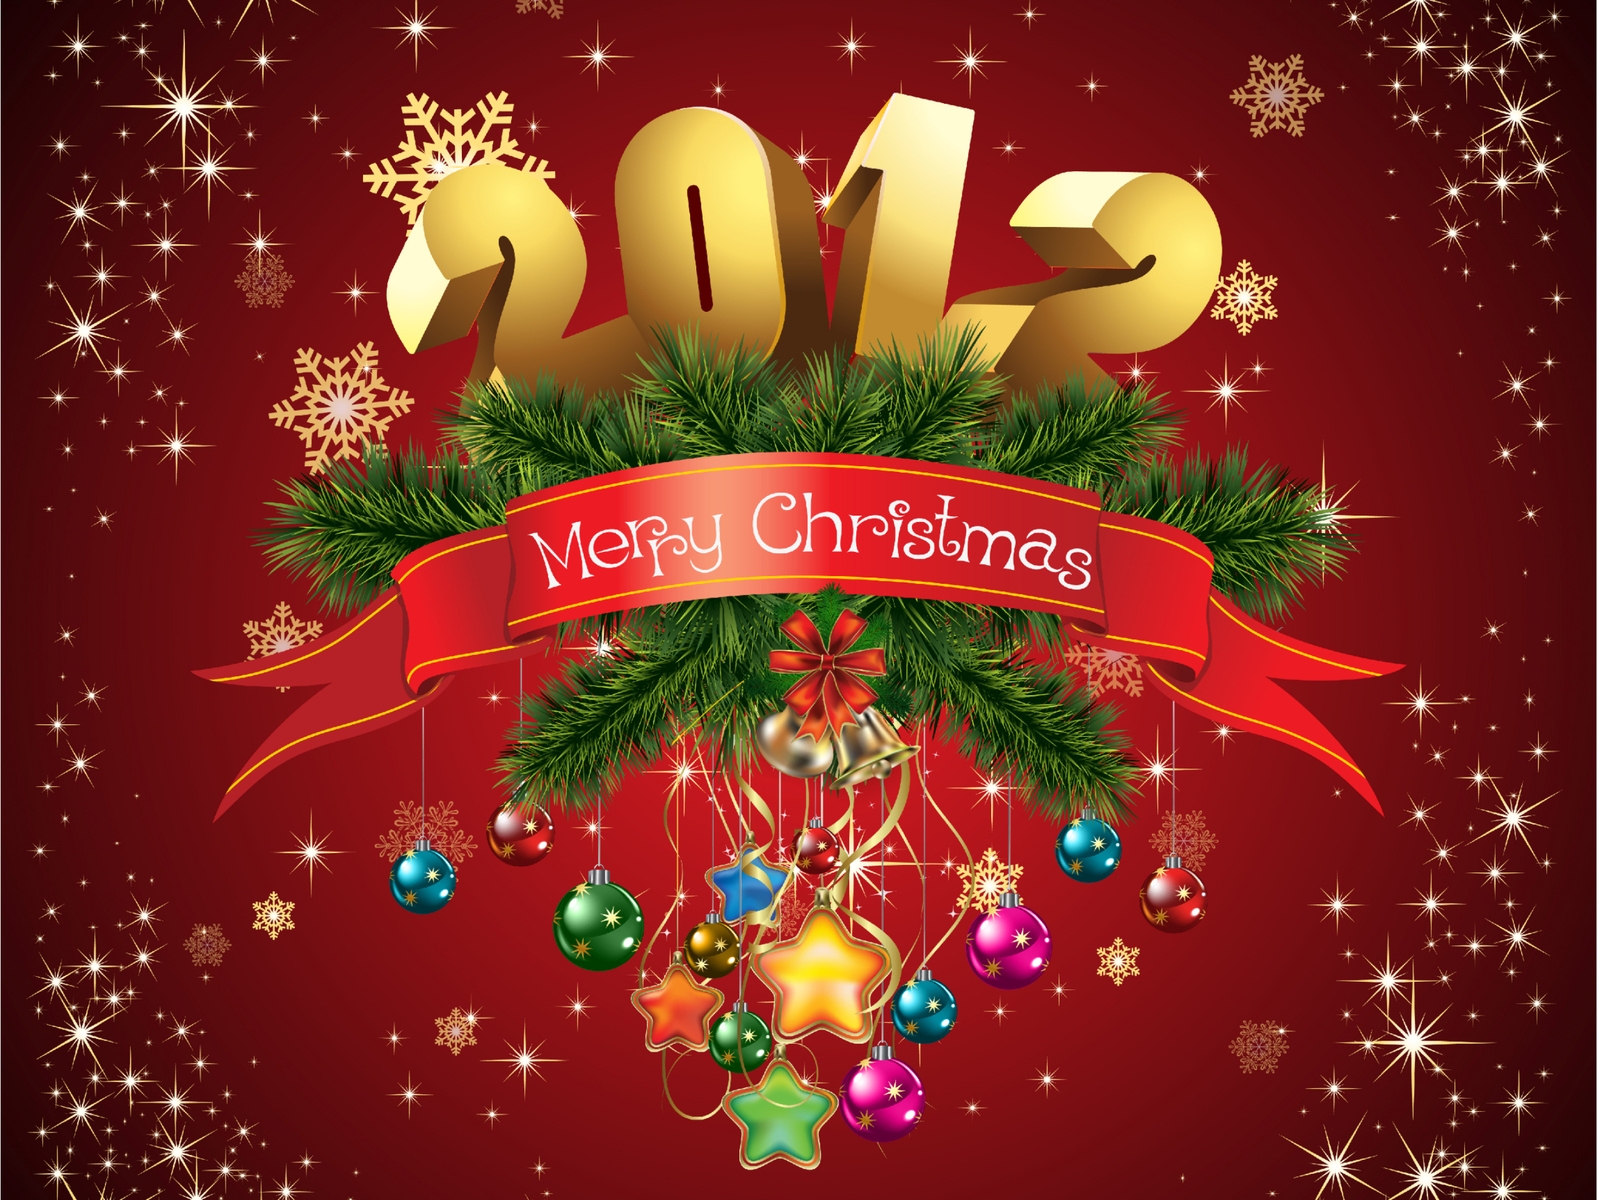 Merry Christmas 2012 for 1600 x 1200 resolution